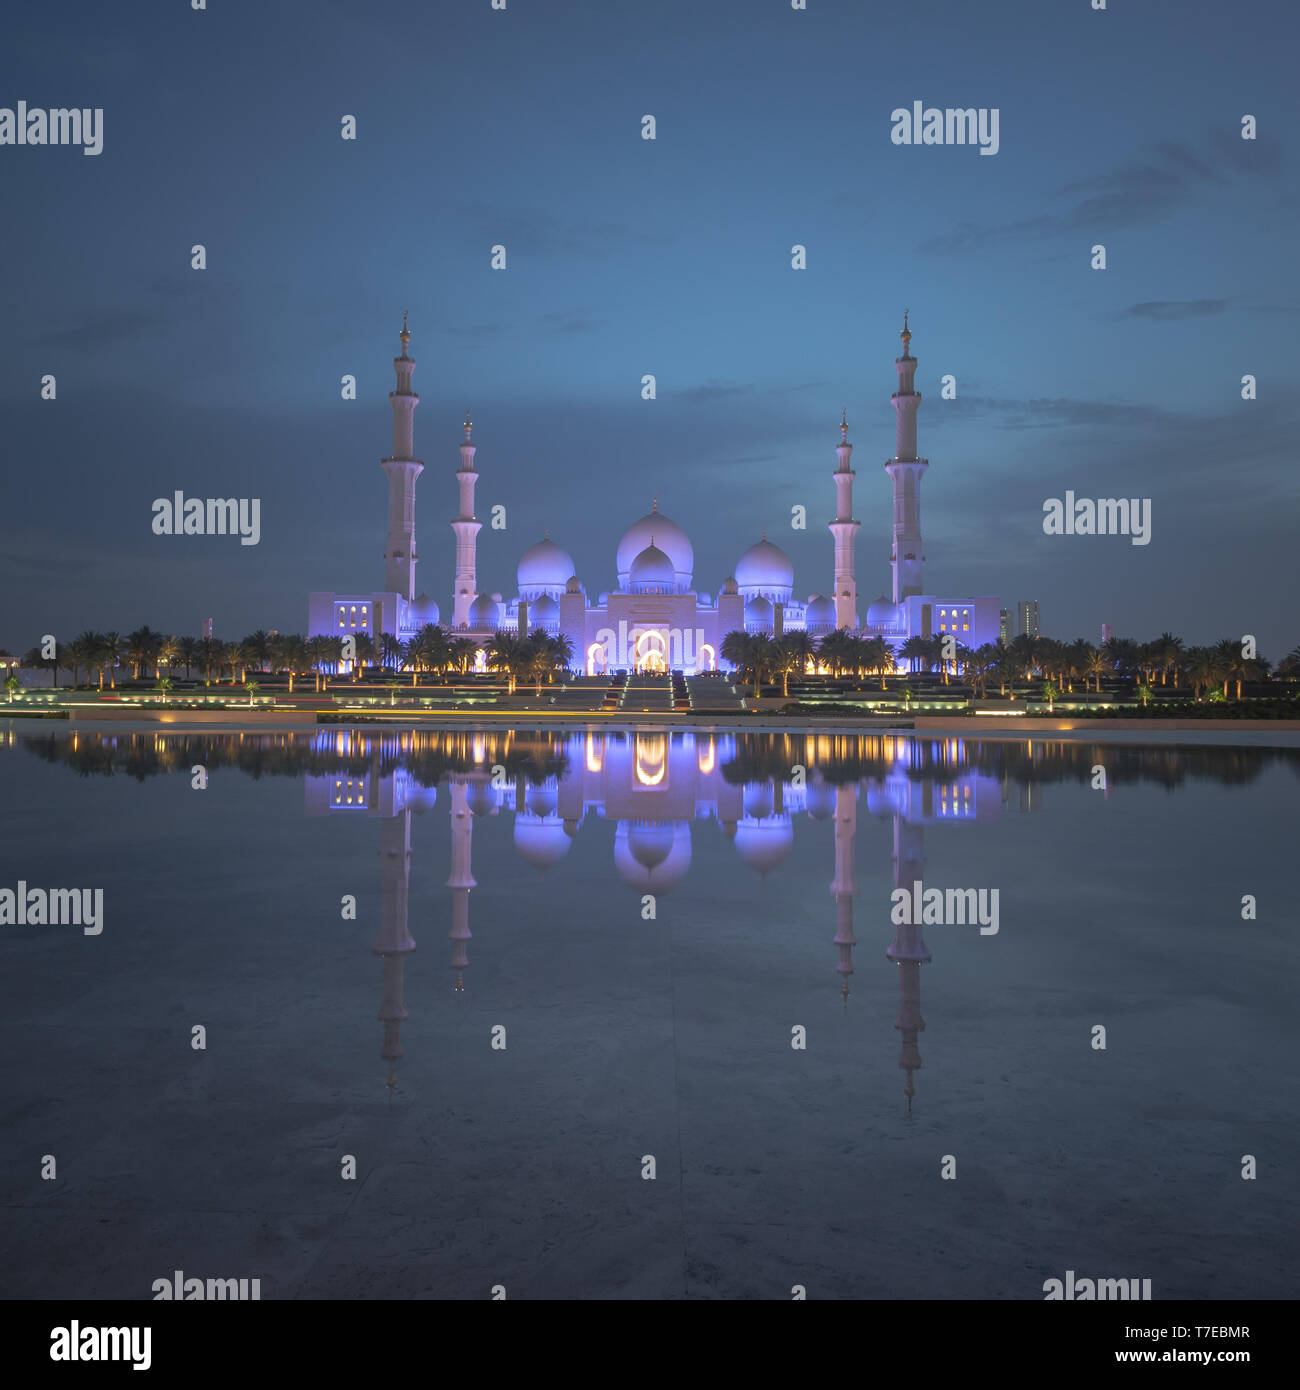 Square format of a wide  angle view of the Great Mosque of Abu Dhabi at night with reflection over a water, United Arab Emirate Stock Photo